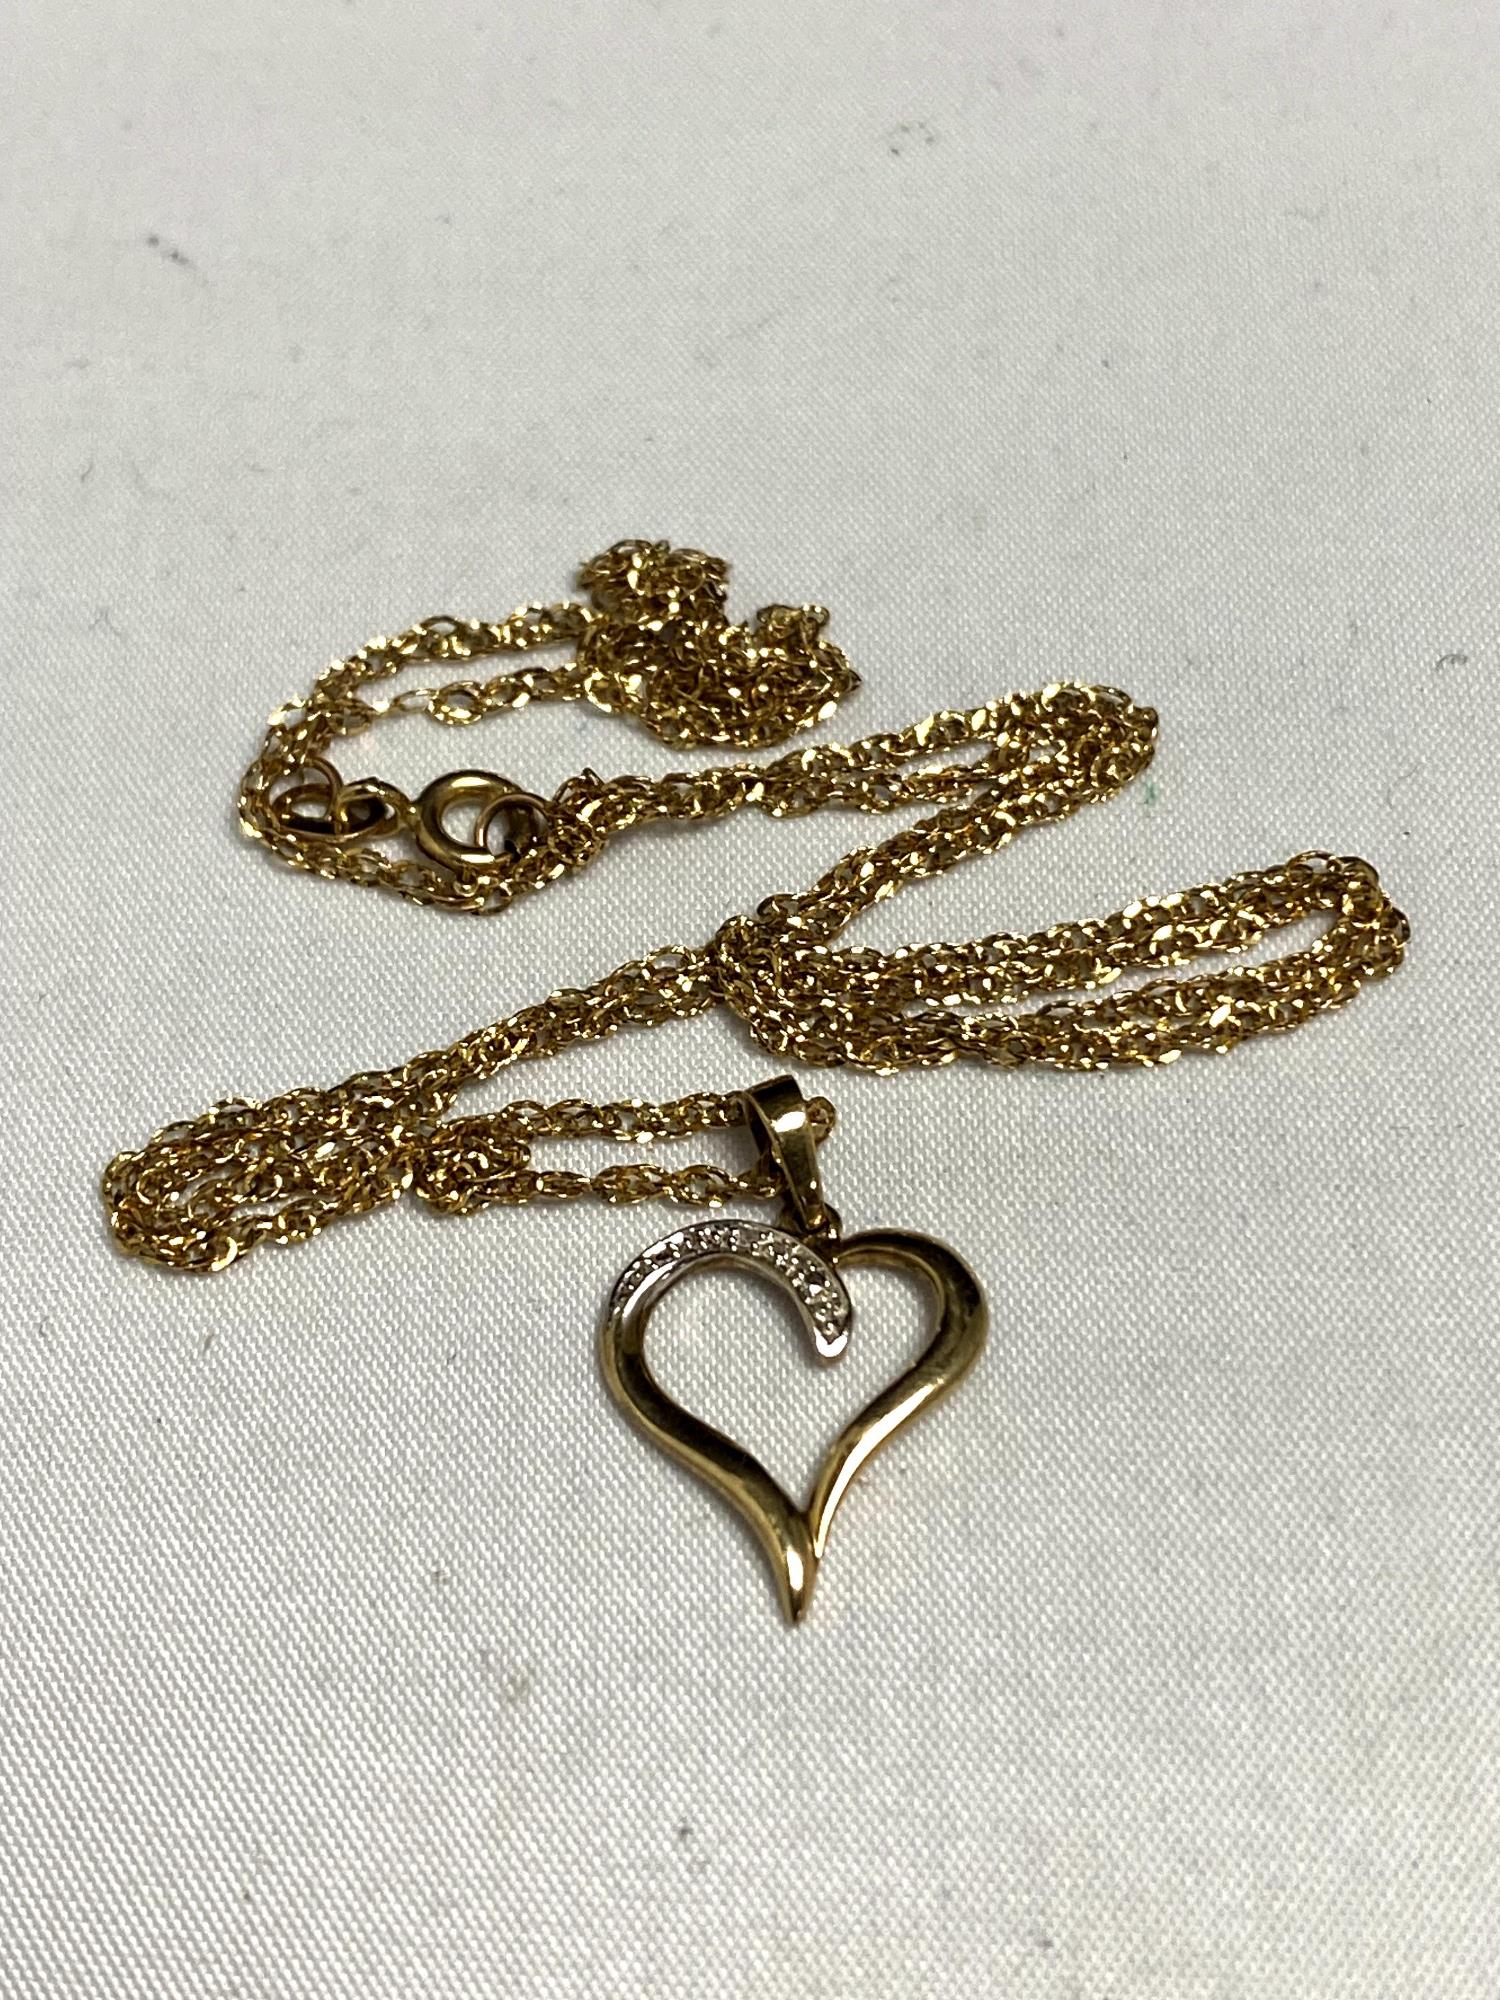 A 9ct gold pendant on chain 1.6g.